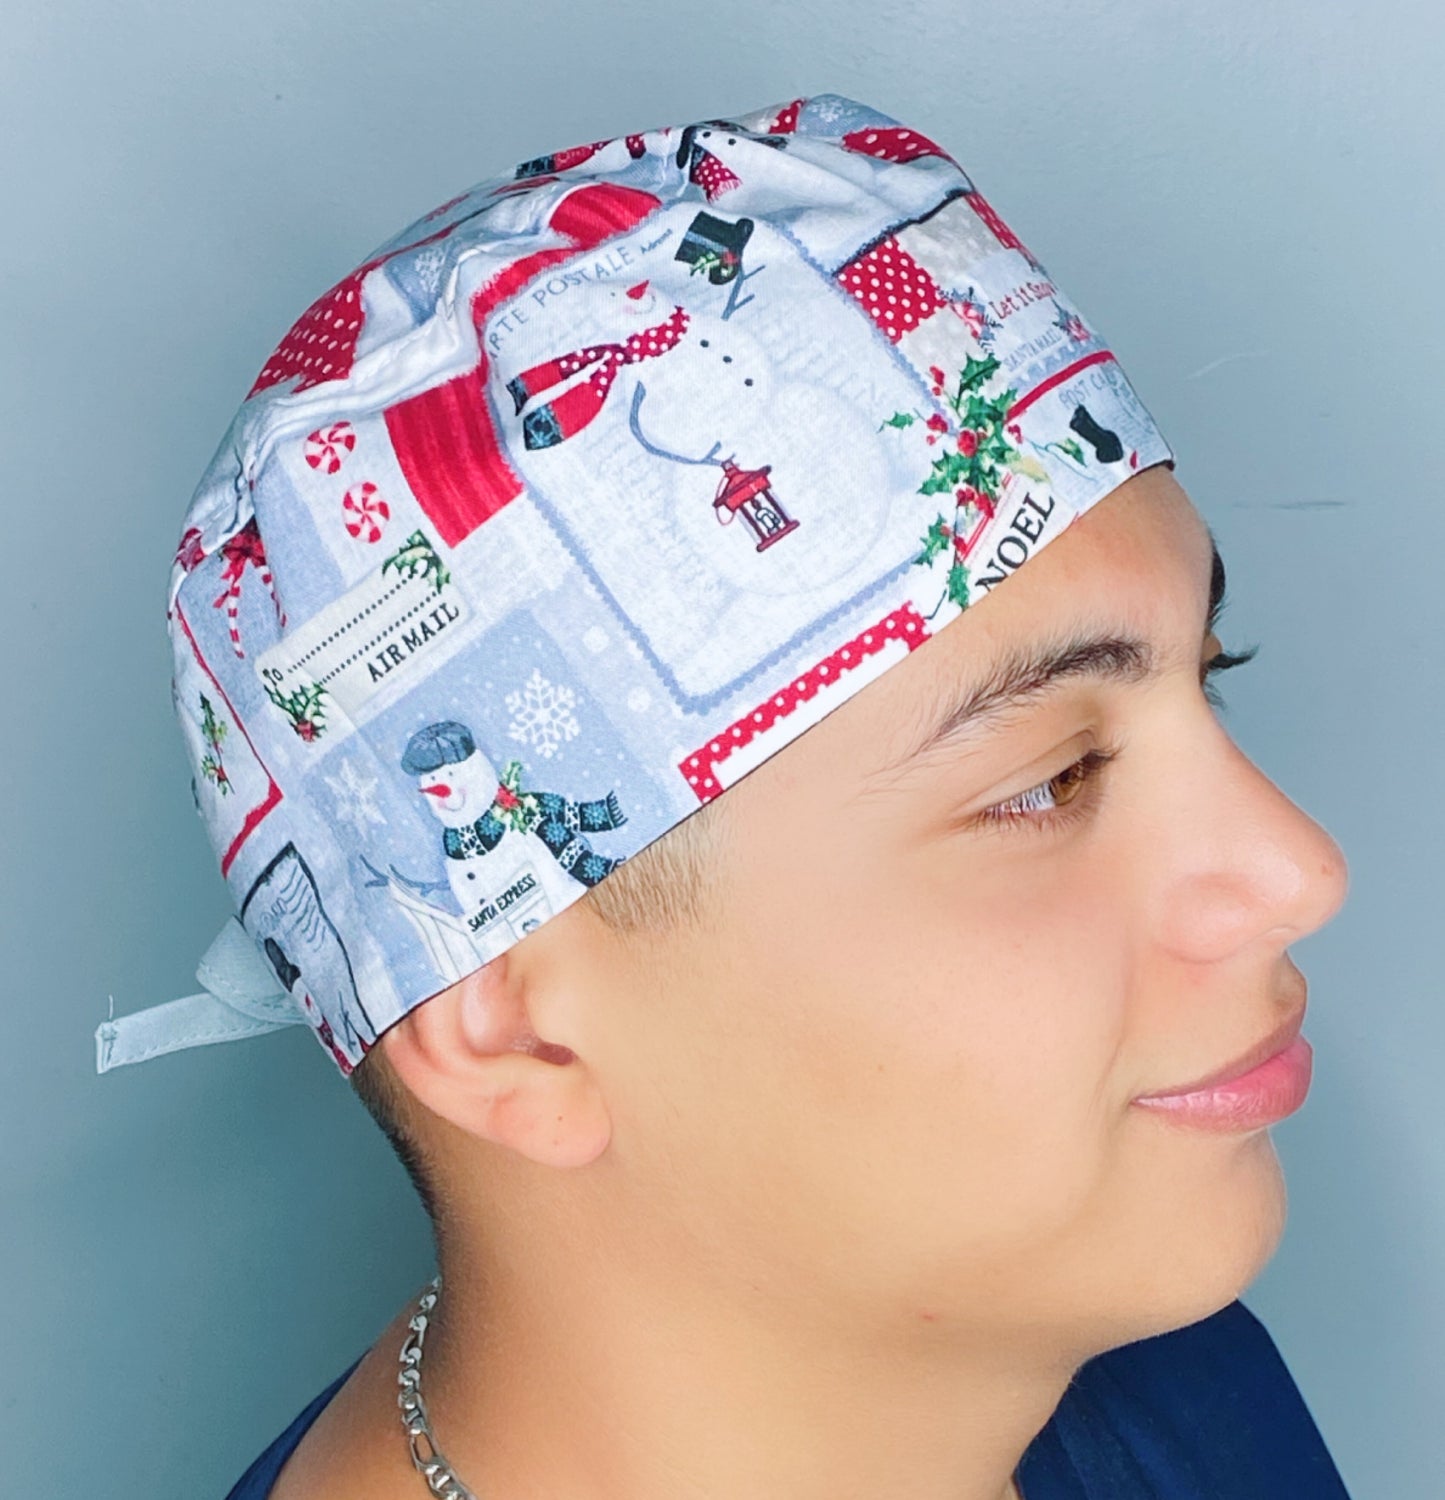 Let it Snow Post Card Mail Christmas/Winter themed Unisex Holiday Scrub Cap